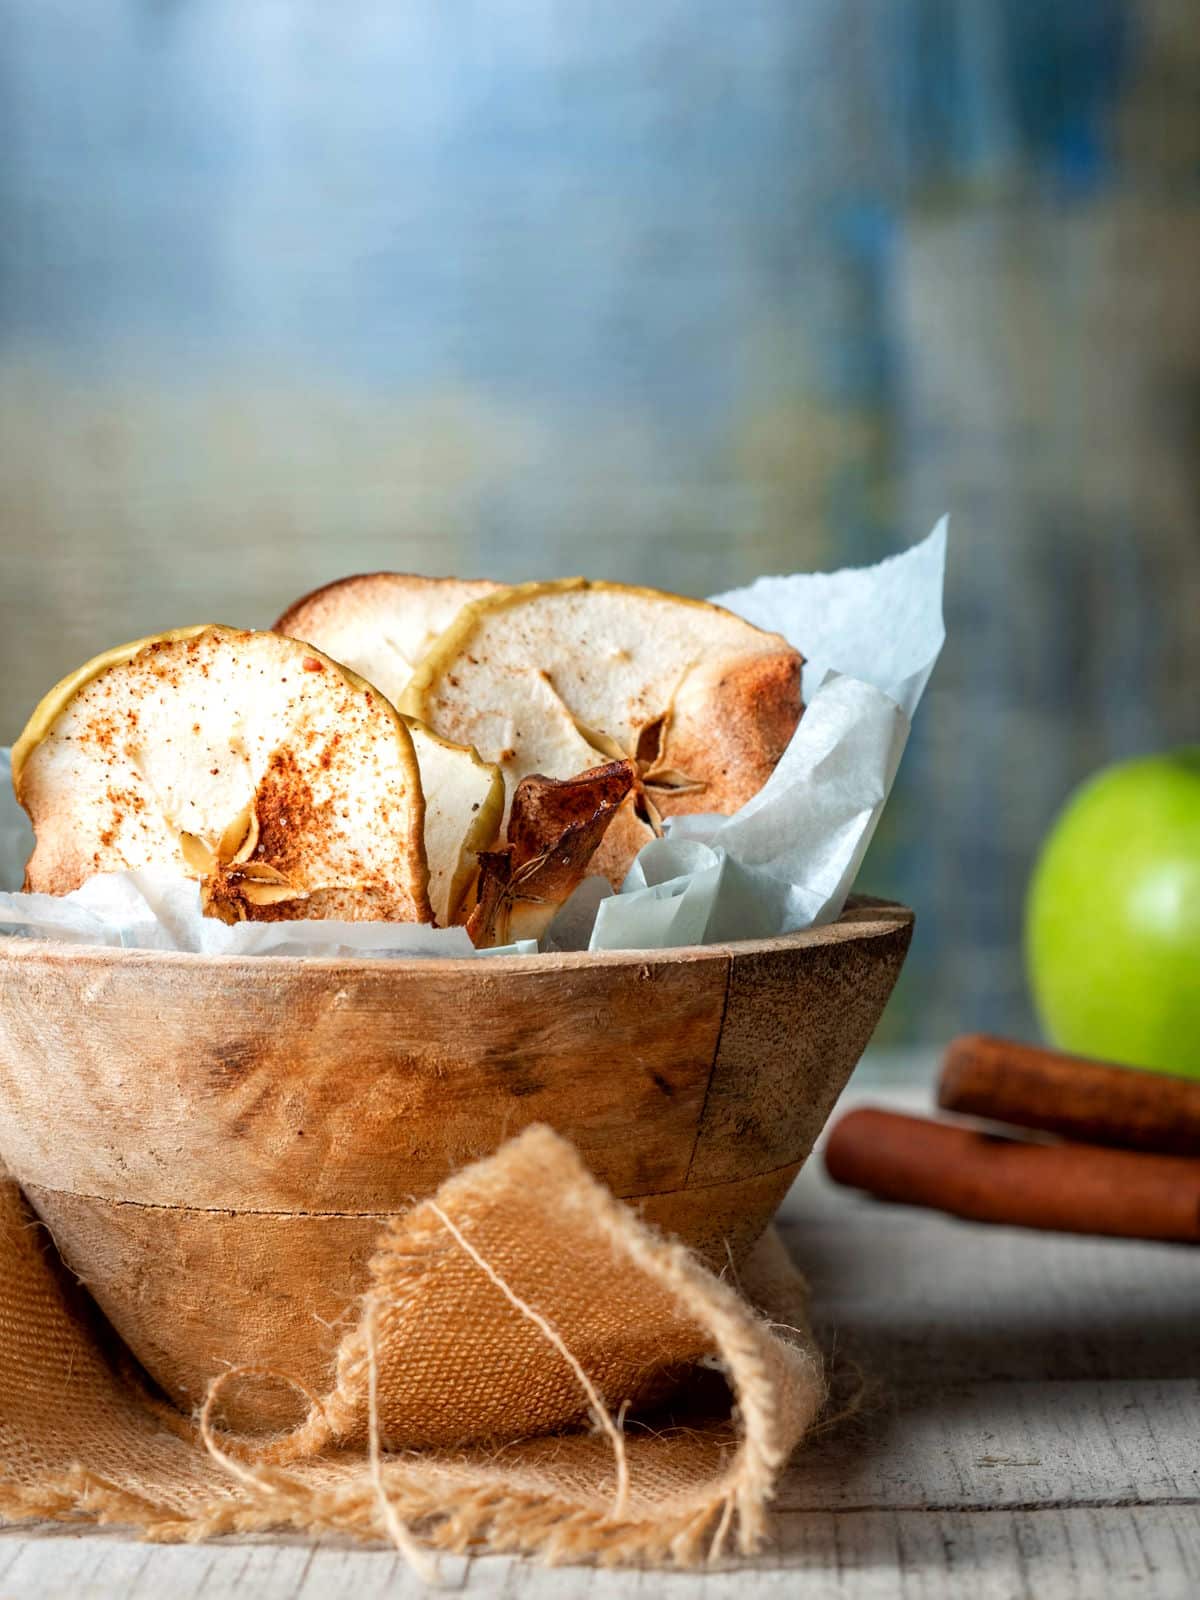 Cinnamon Apple Chips in a wooden bowl with a green apple and cinnamon sticks in the background.